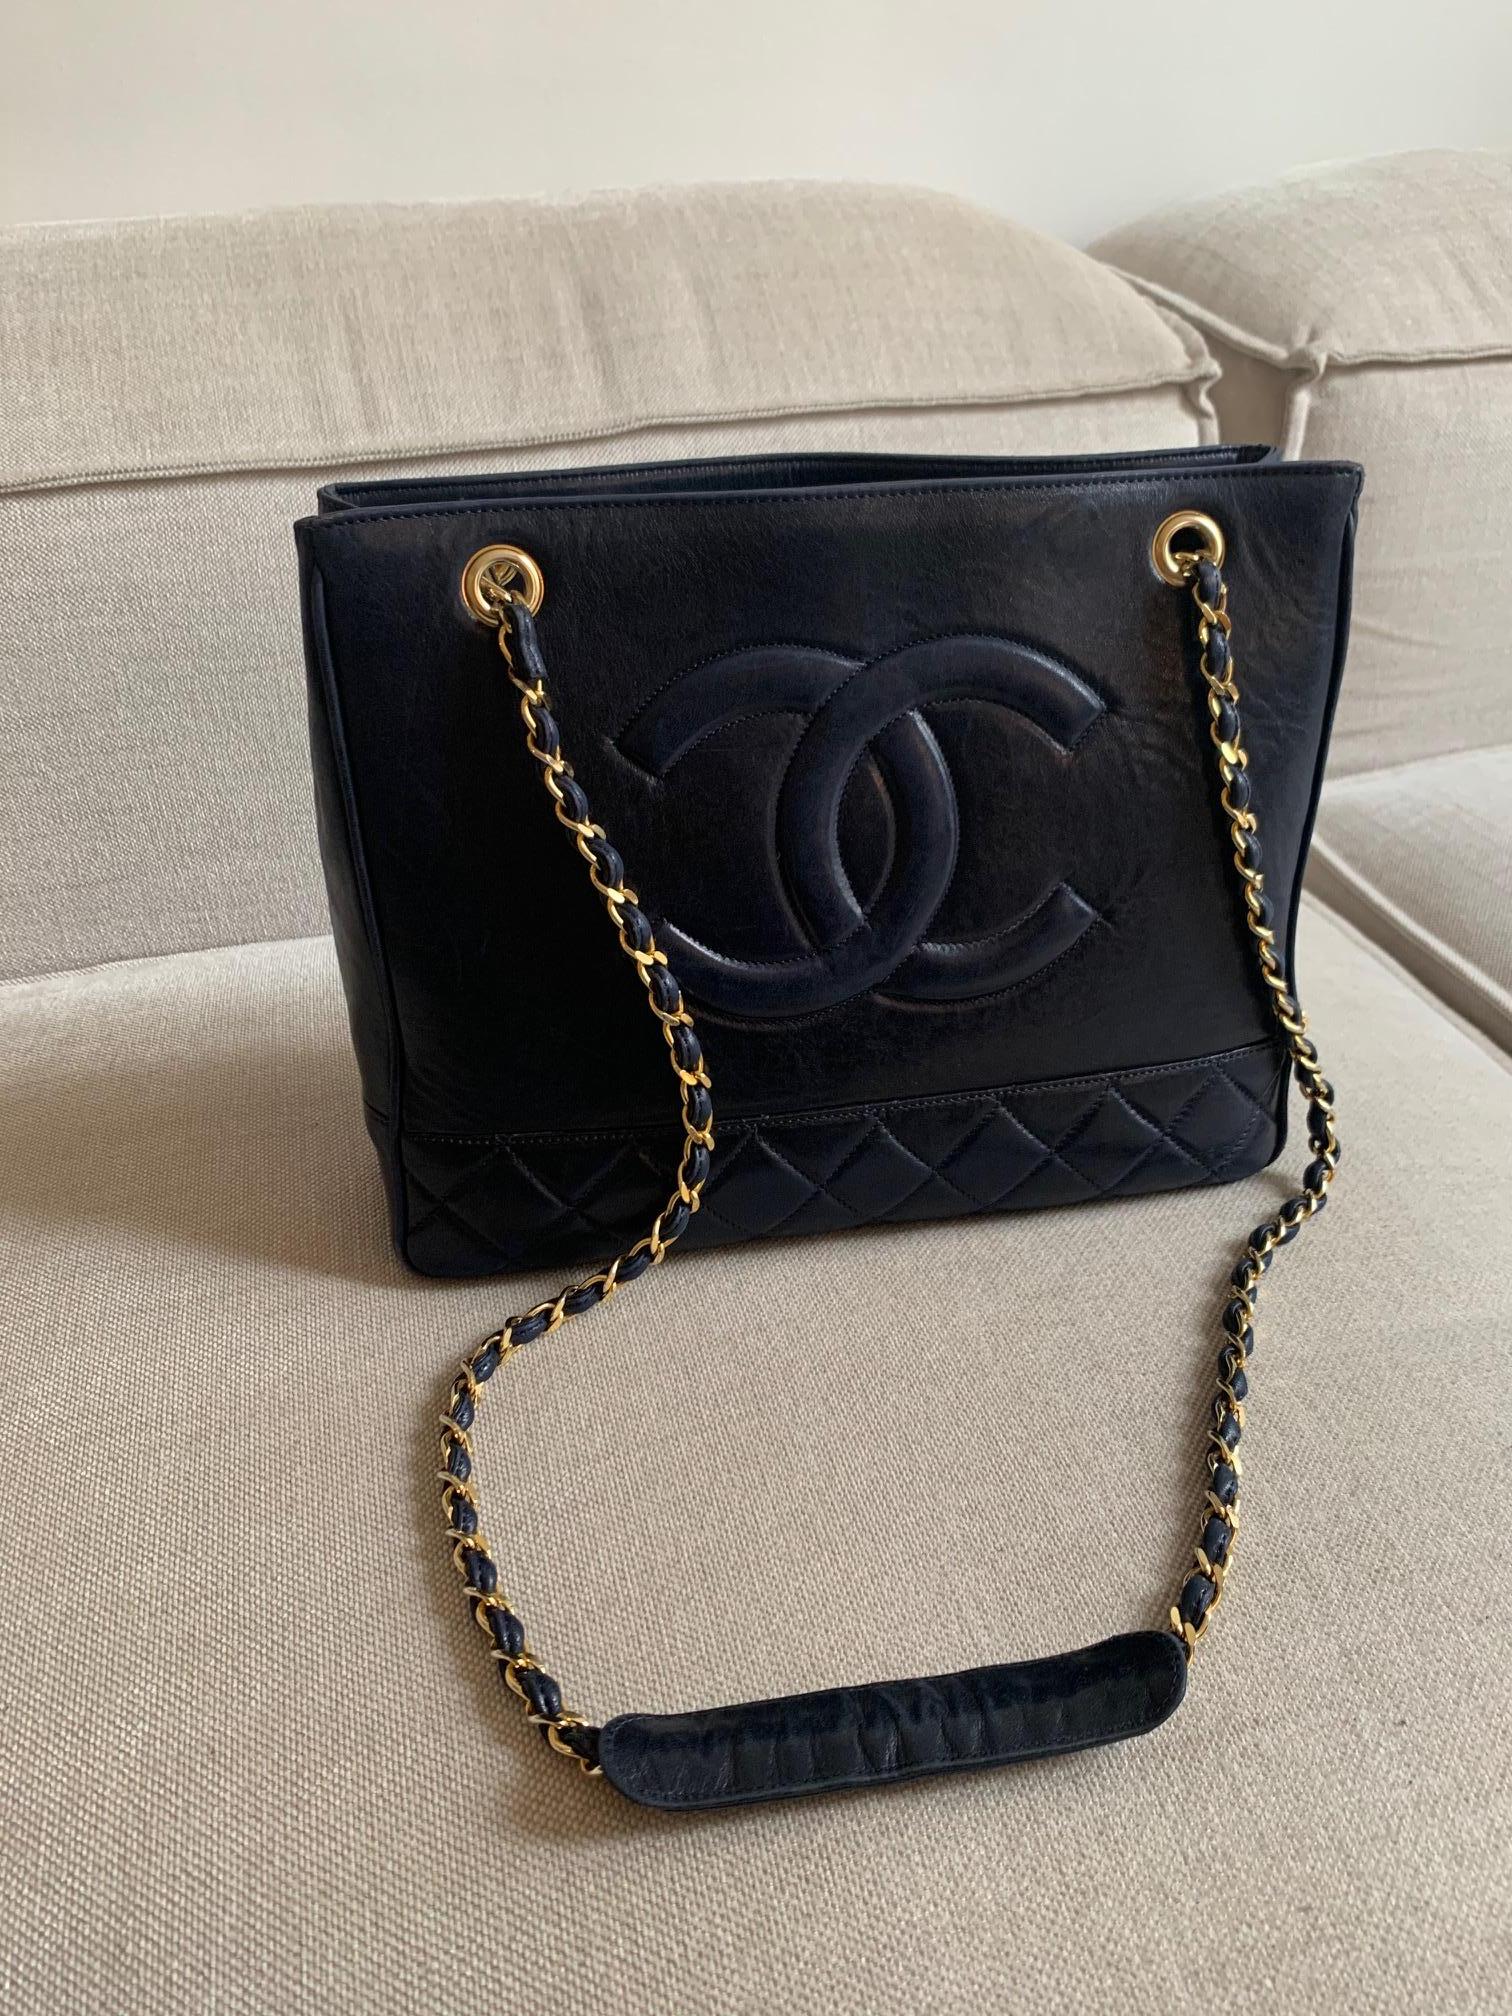 Vintage Chanel Cabas bag Navy leather and gold chain  For Sale 2